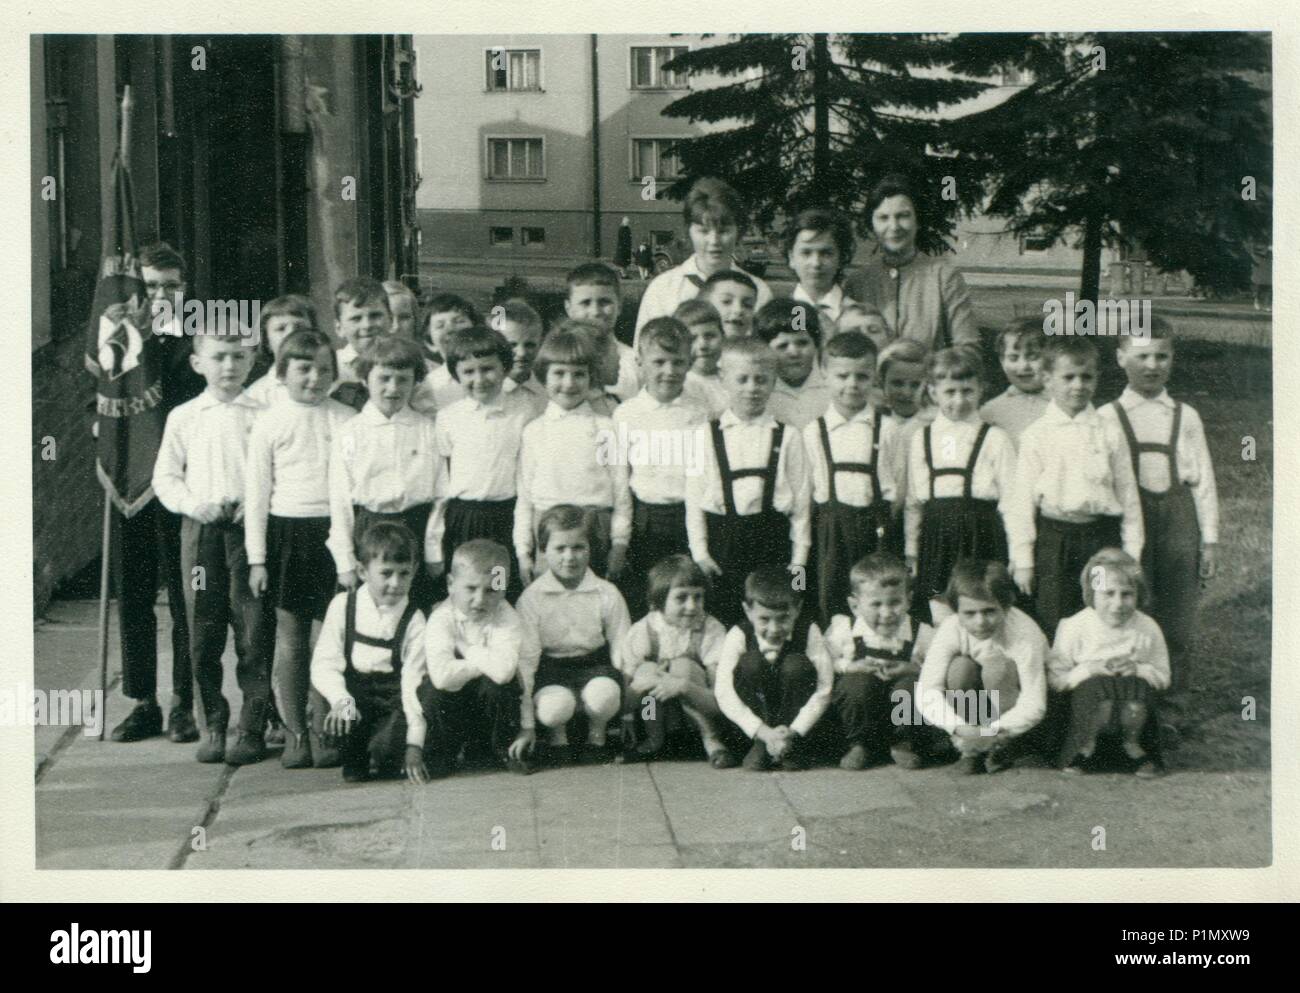 THE CZECHOSLOVAK SOCIALIST REPUBLIC - CIRCA 1960s: Retro photo shows small pupils and they female teachers (schoolmistresses) pose for photograper outside. Vintage black & white photography. Stock Photo